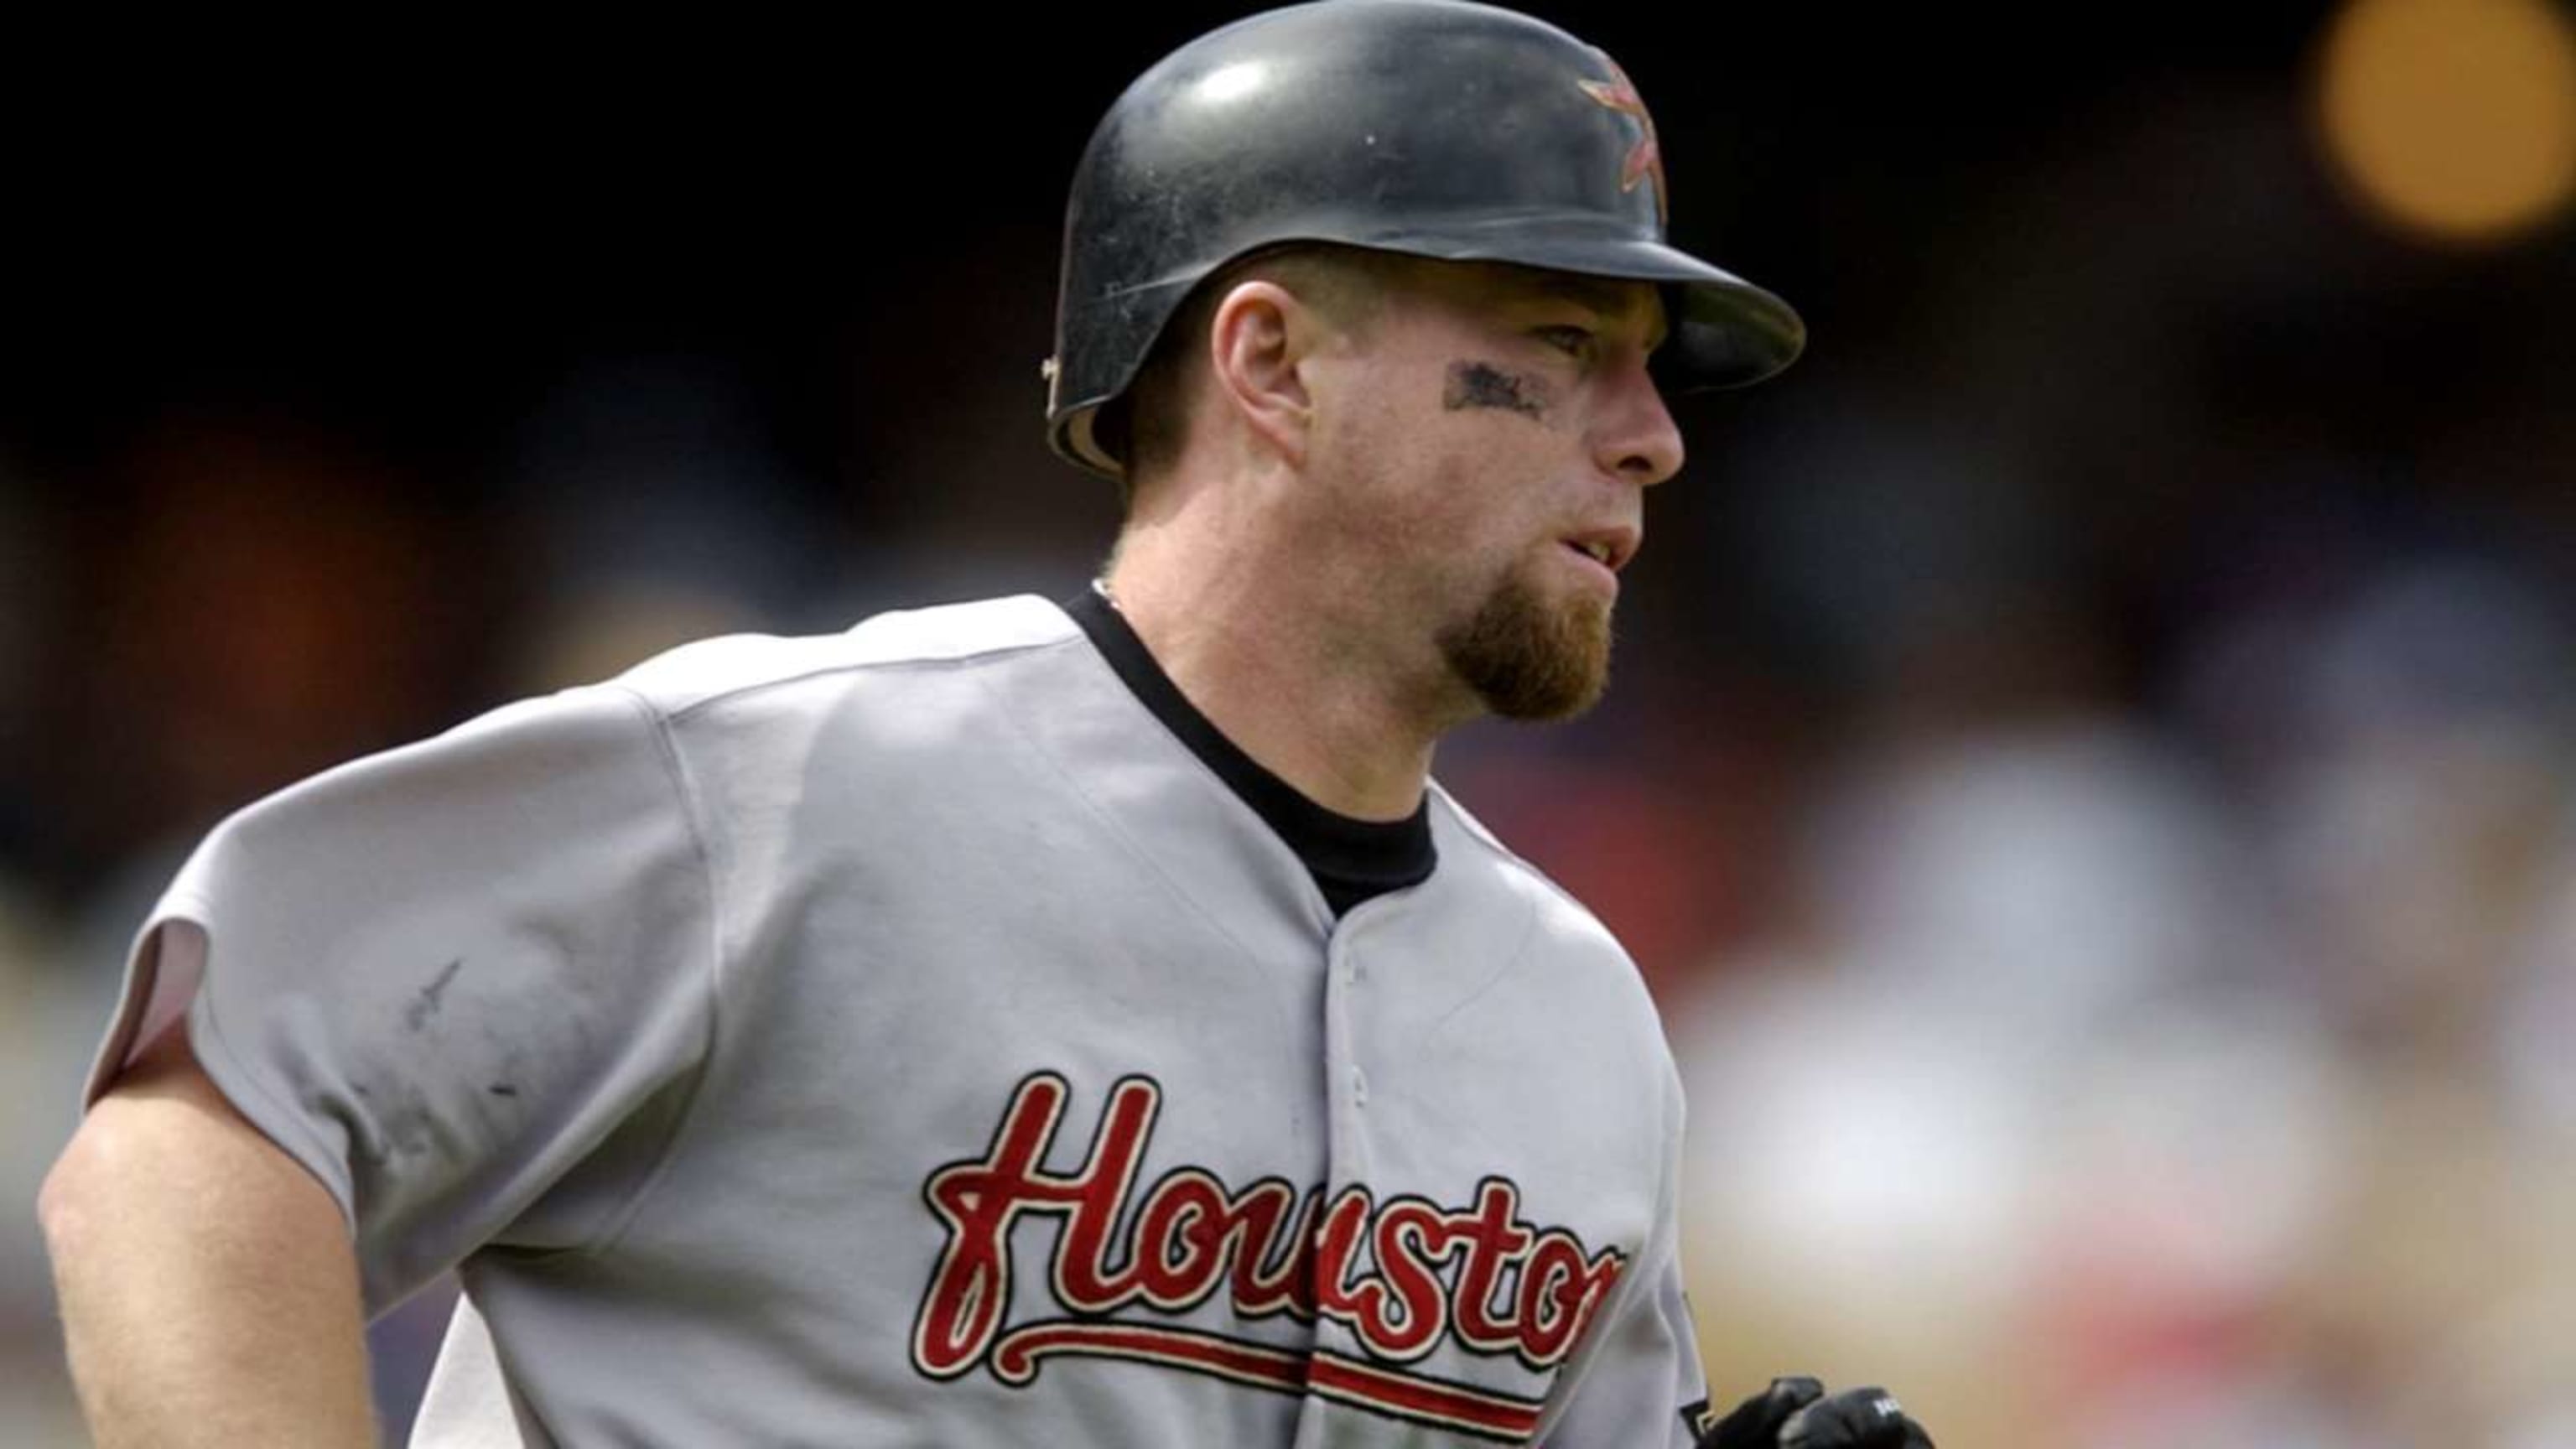 Jeff Bagwell Should Have Been Elected Into The MLB Hall of Fame